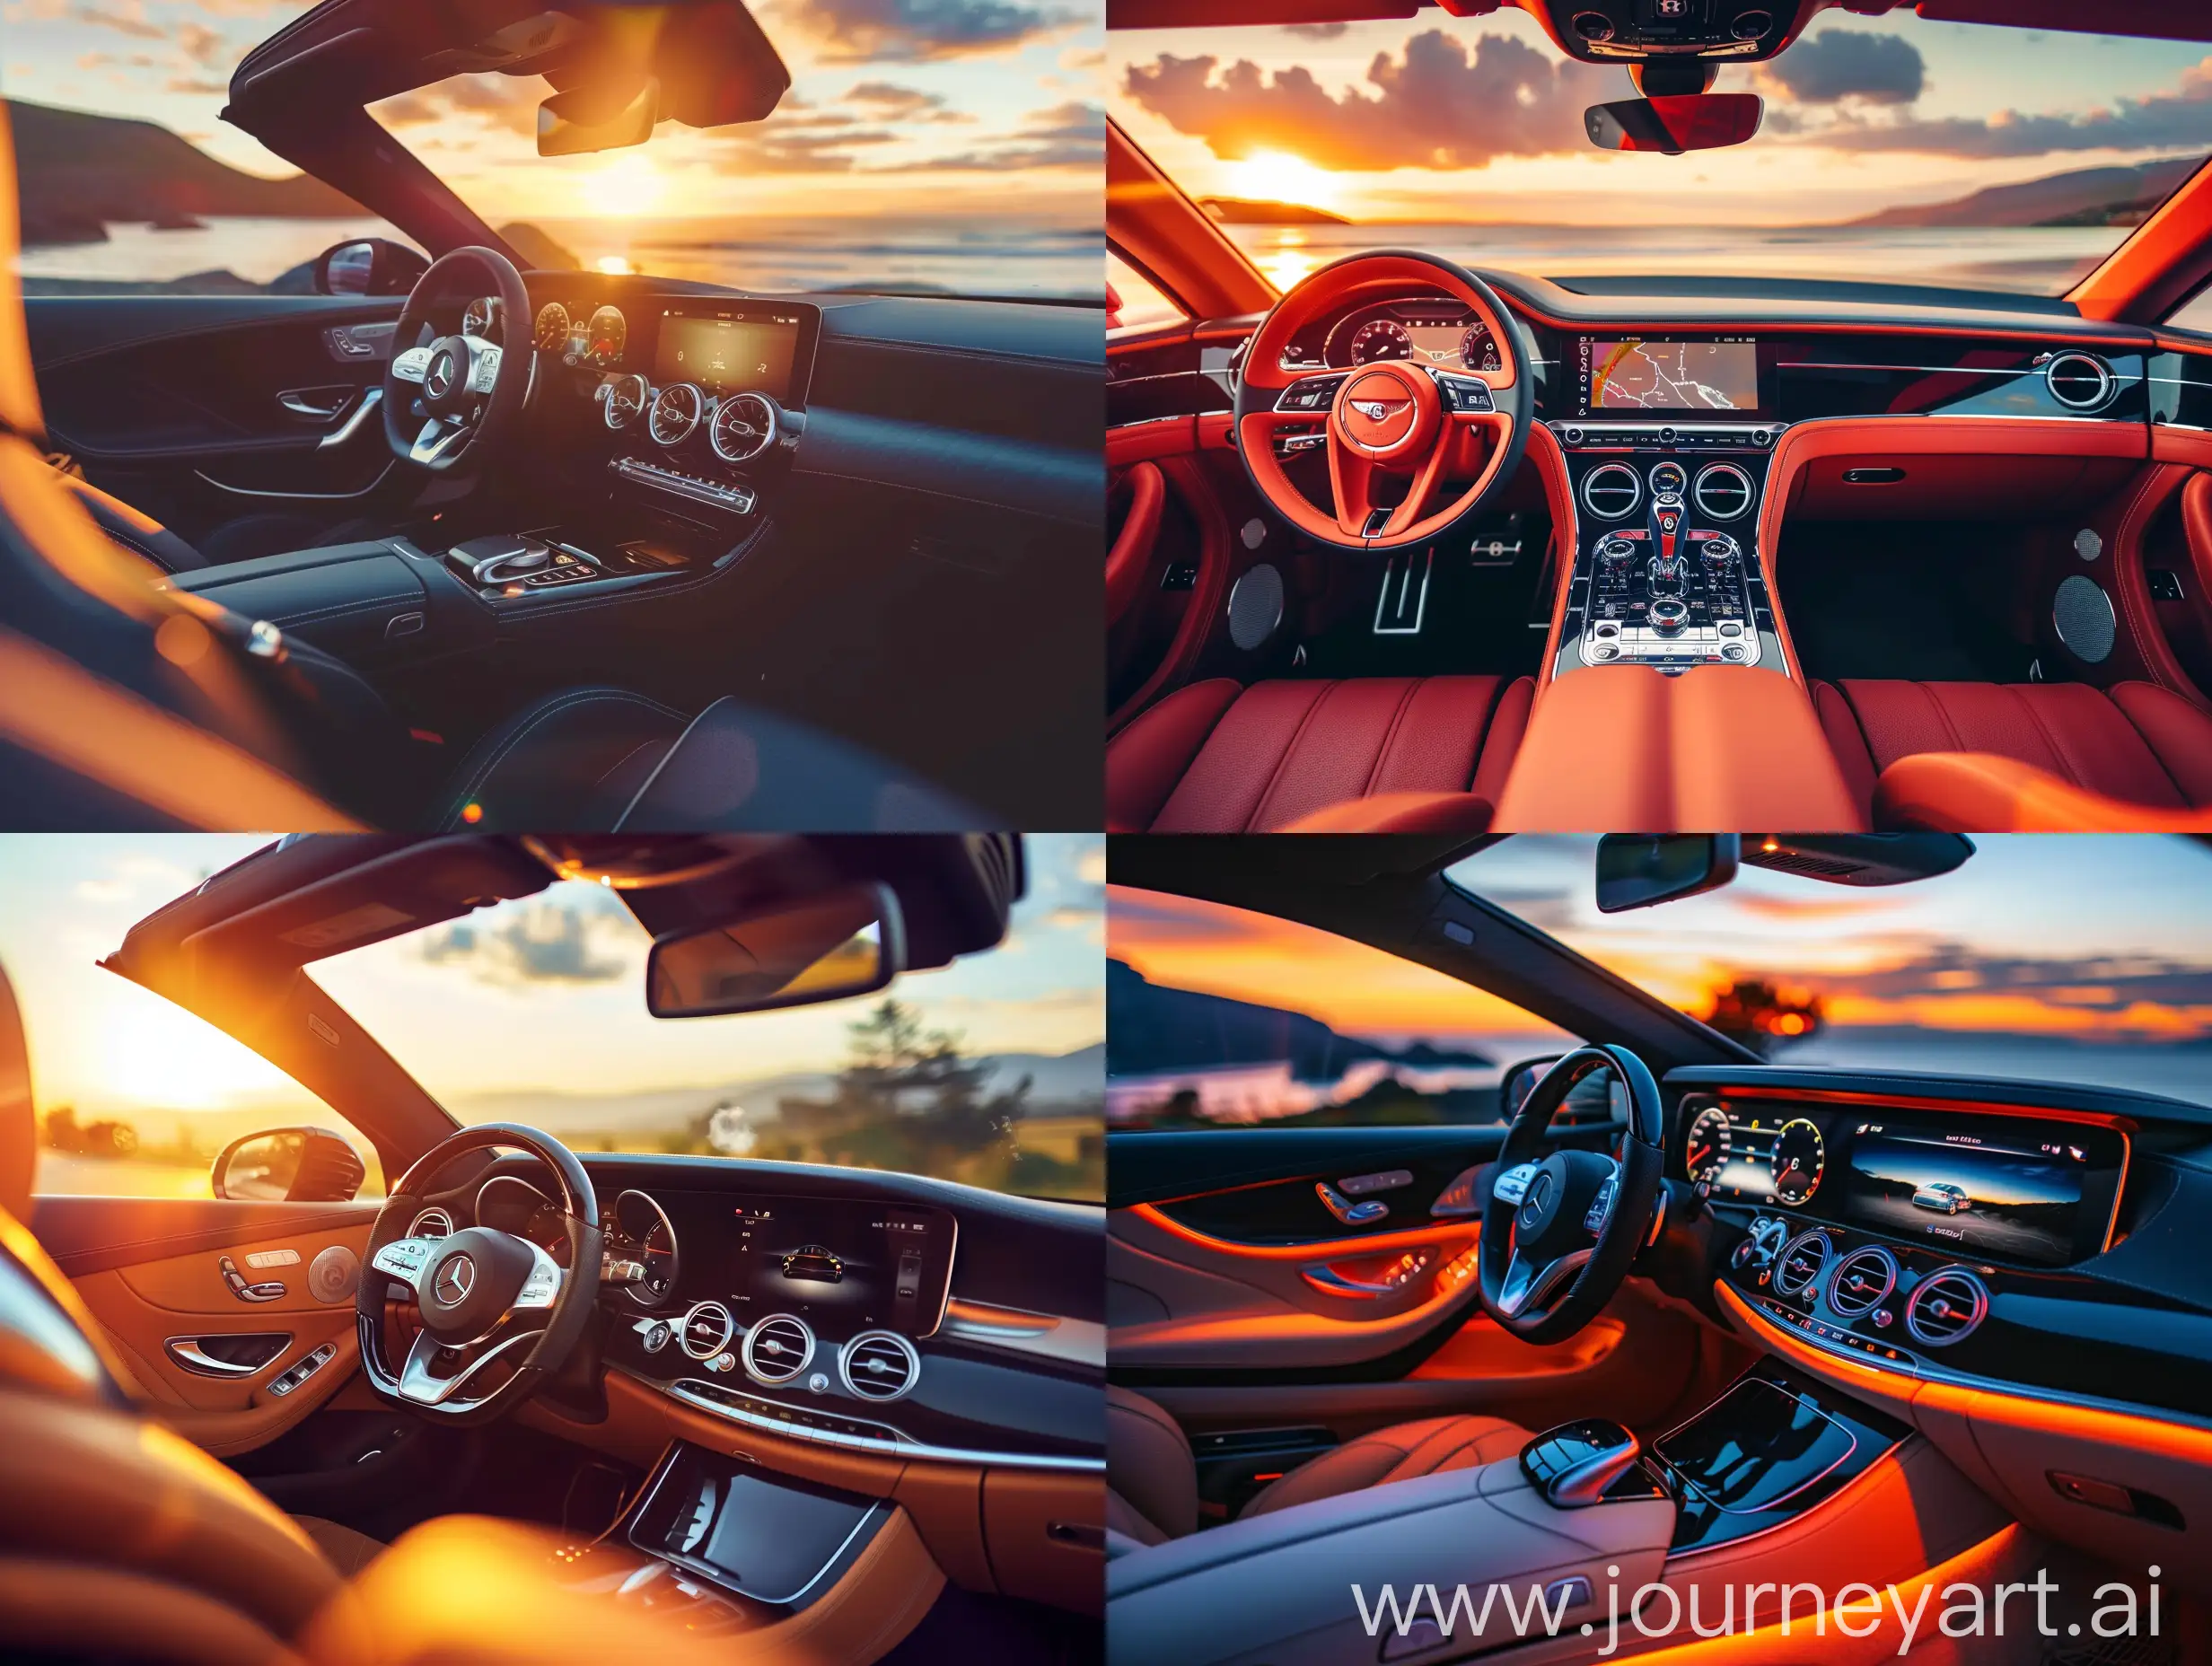 Luxury-Car-Interior-with-Sunset-Glow-Dashboard-and-Seats-CloseUp